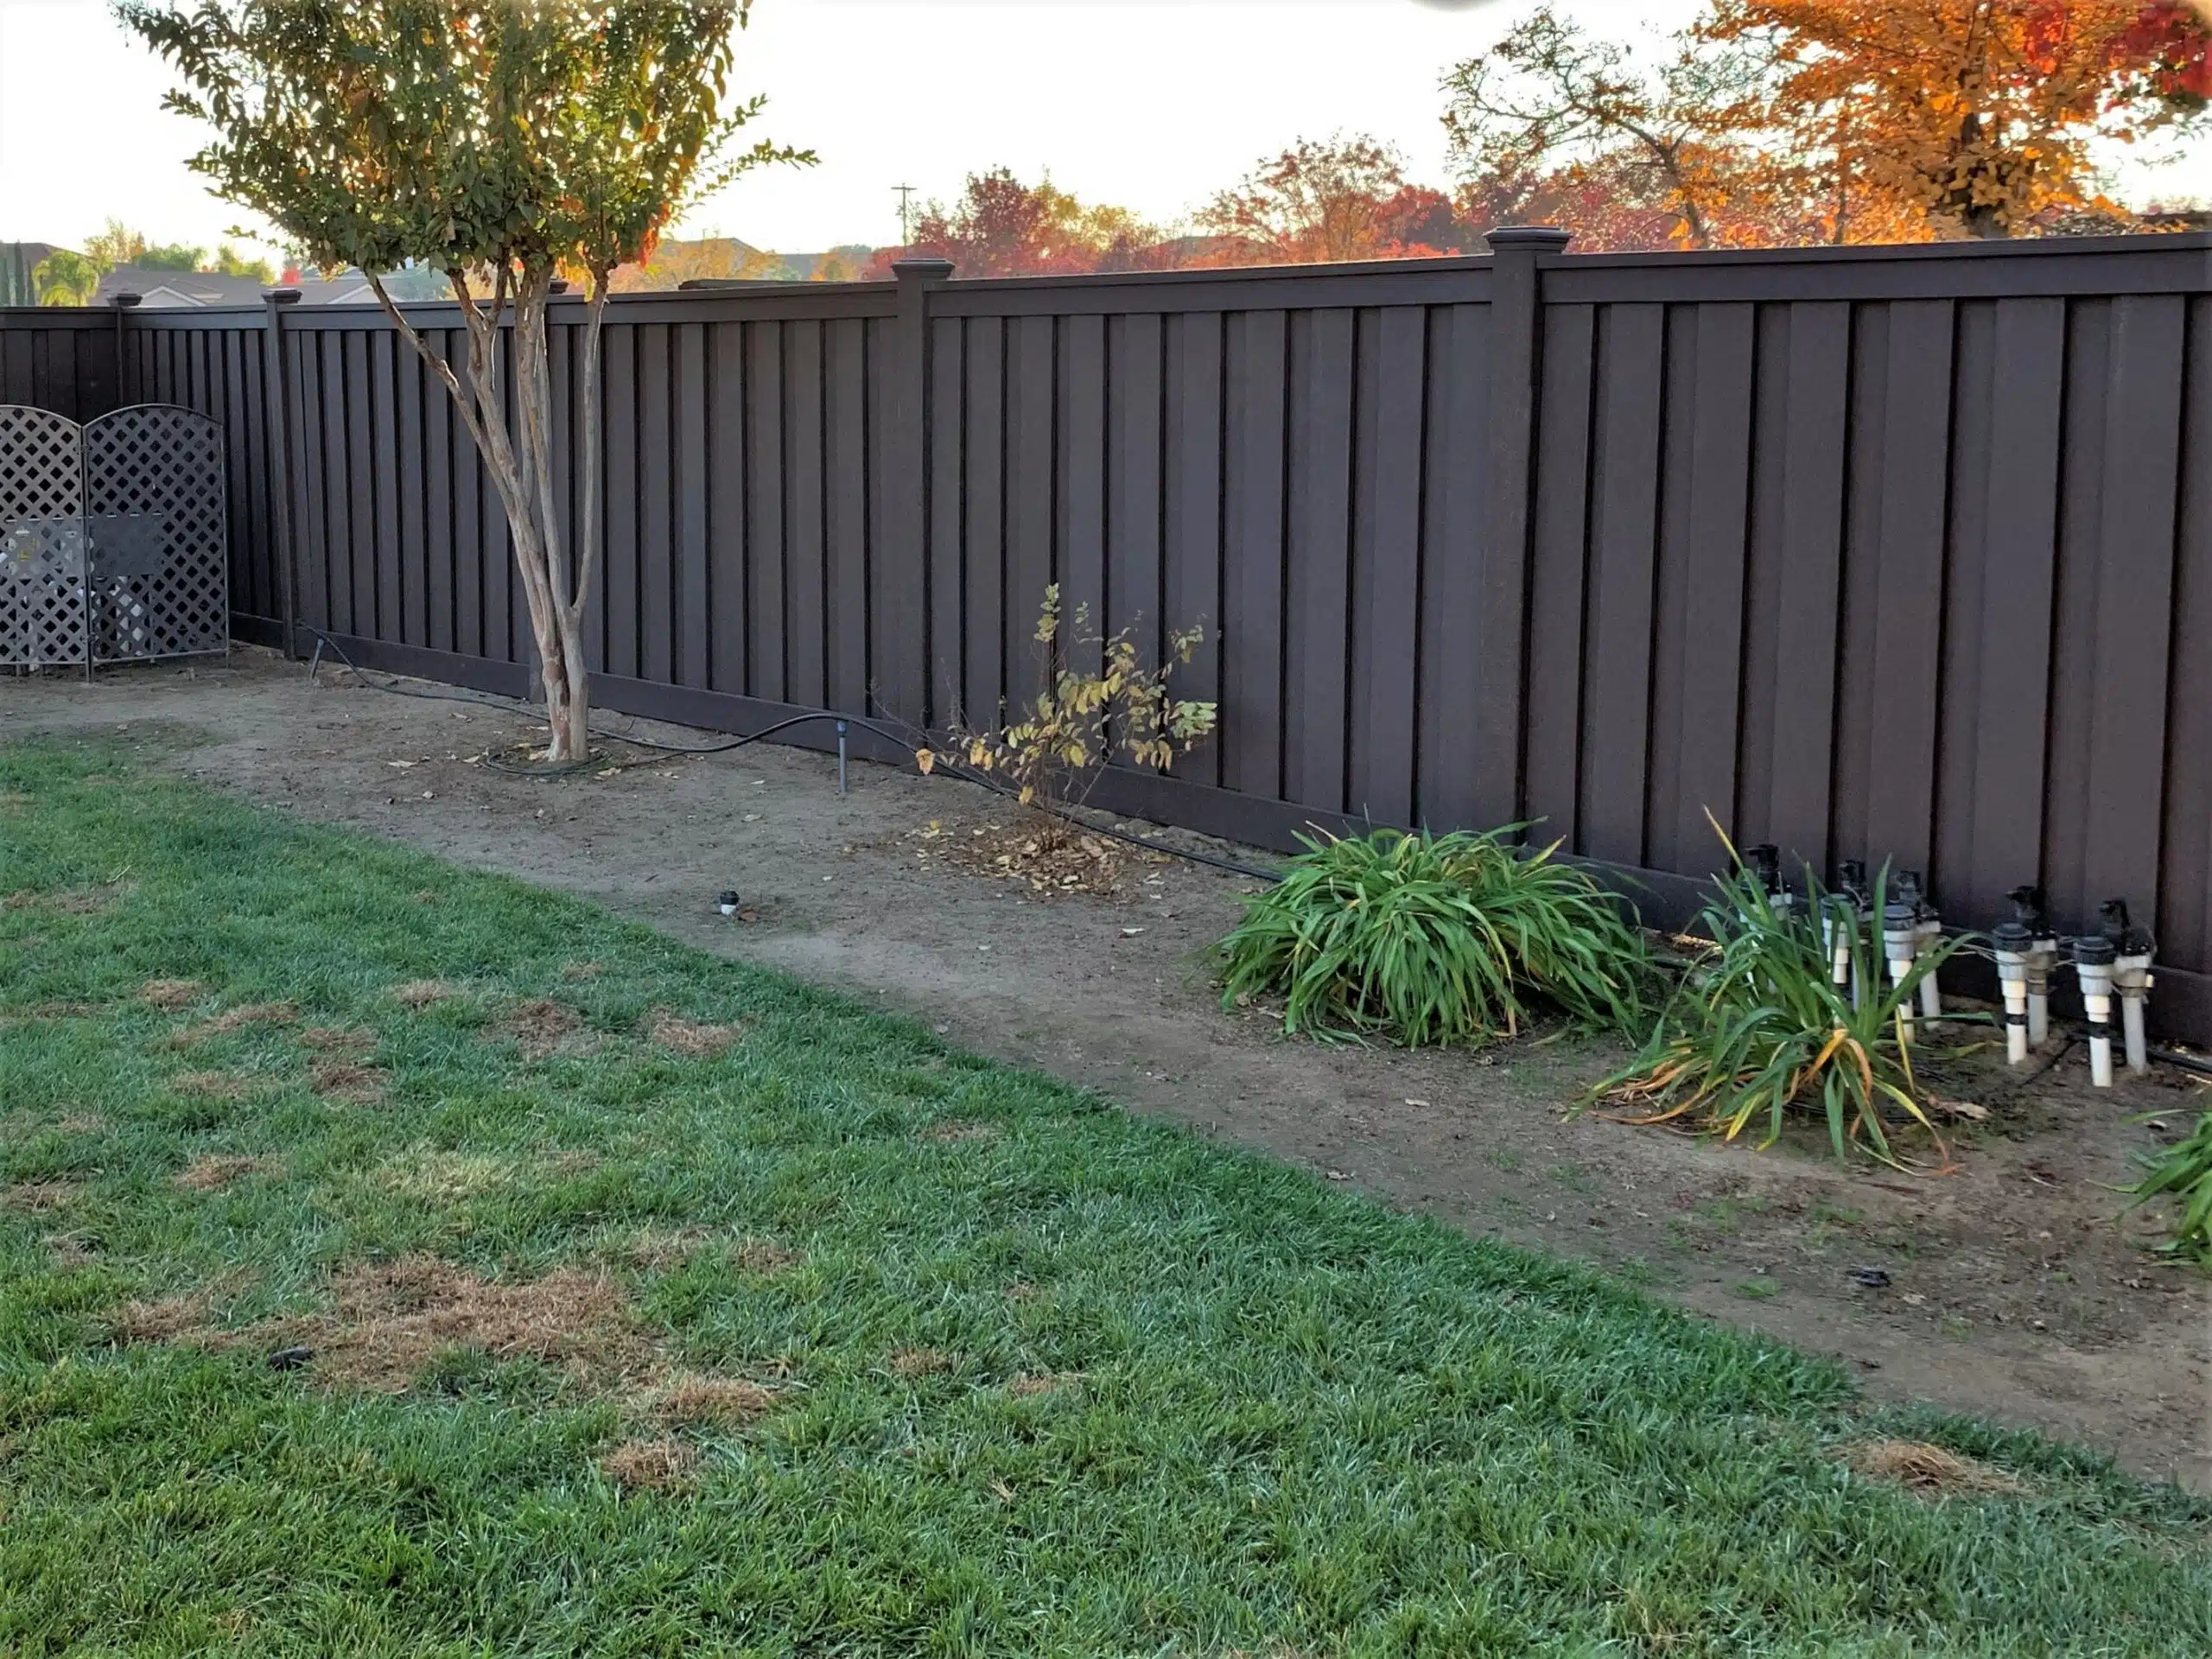 A Woodland Brown Trex Fence in San Joaquin Valley, California